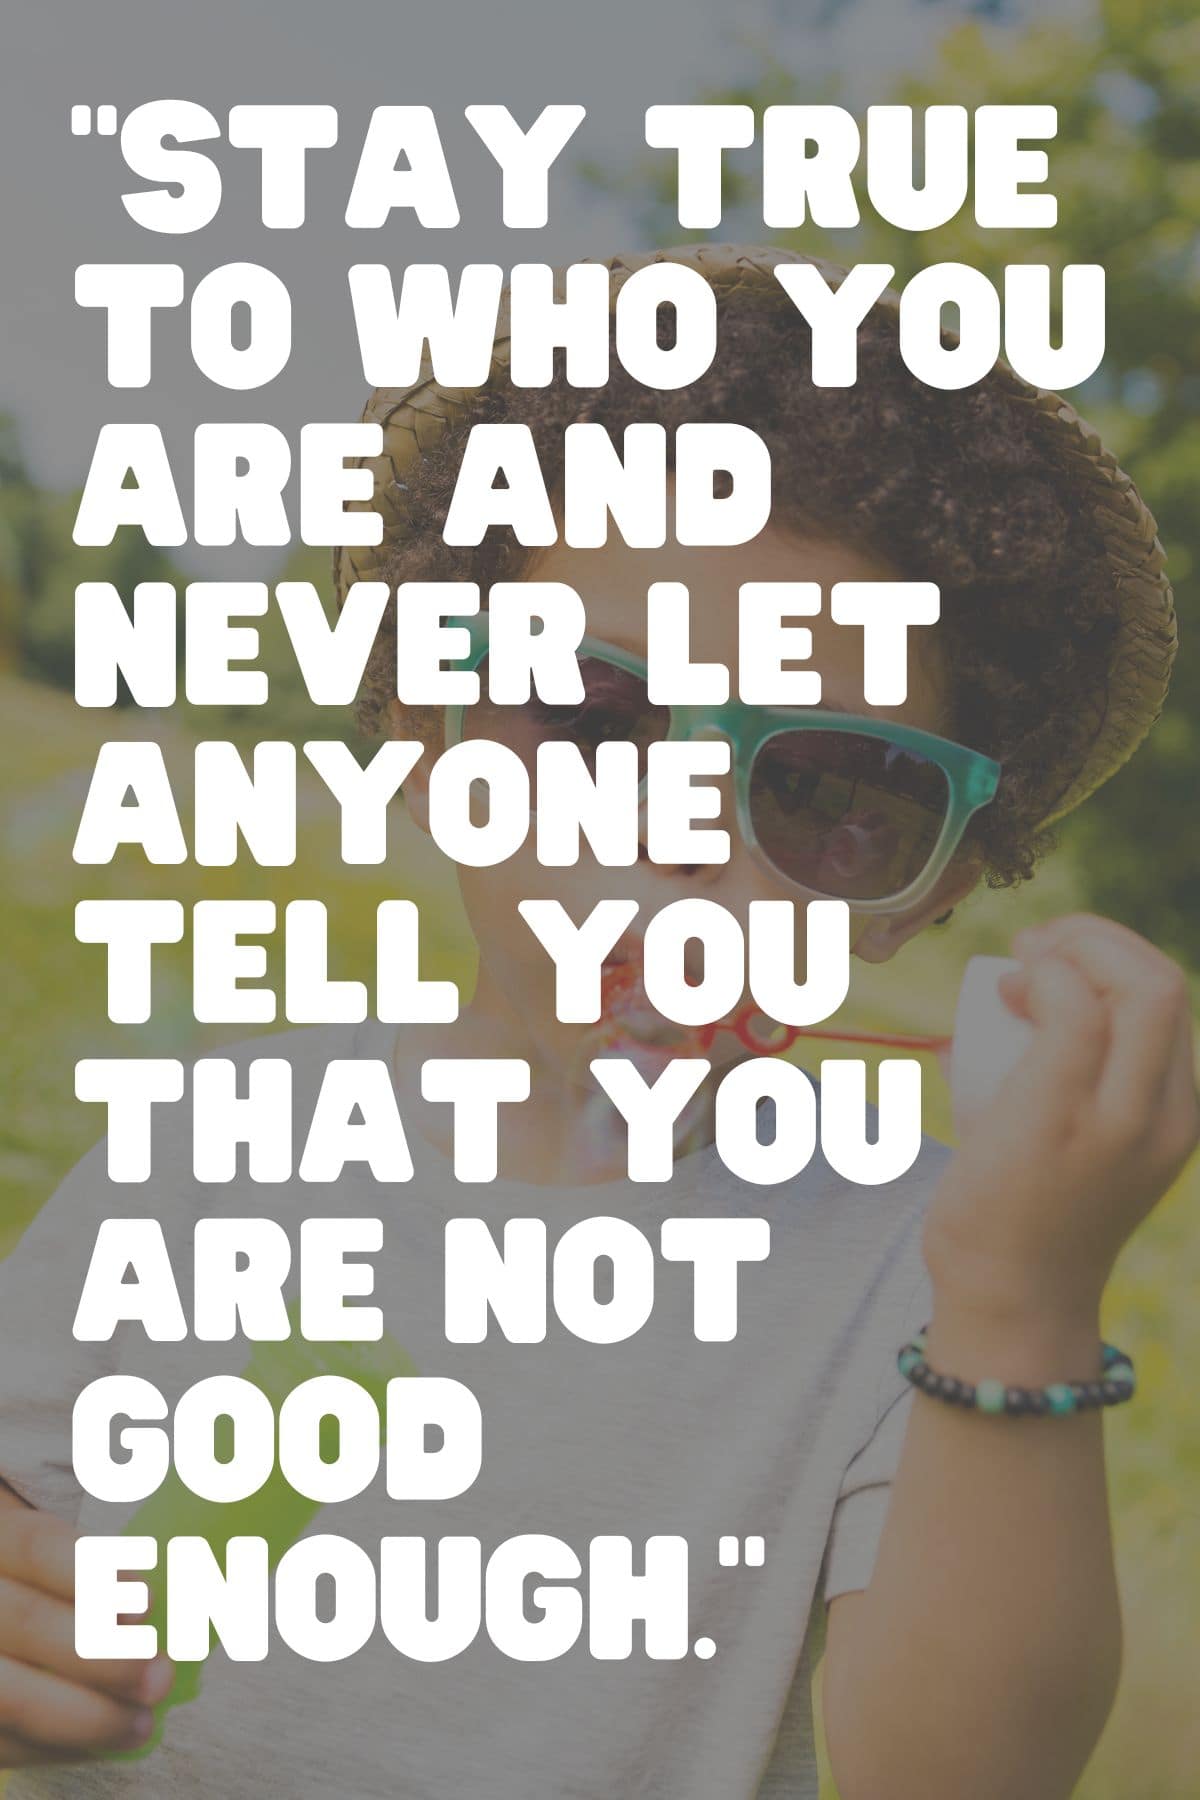 "Stay true to who you are and never let anyone tell you that you are not good enough." - Unknown